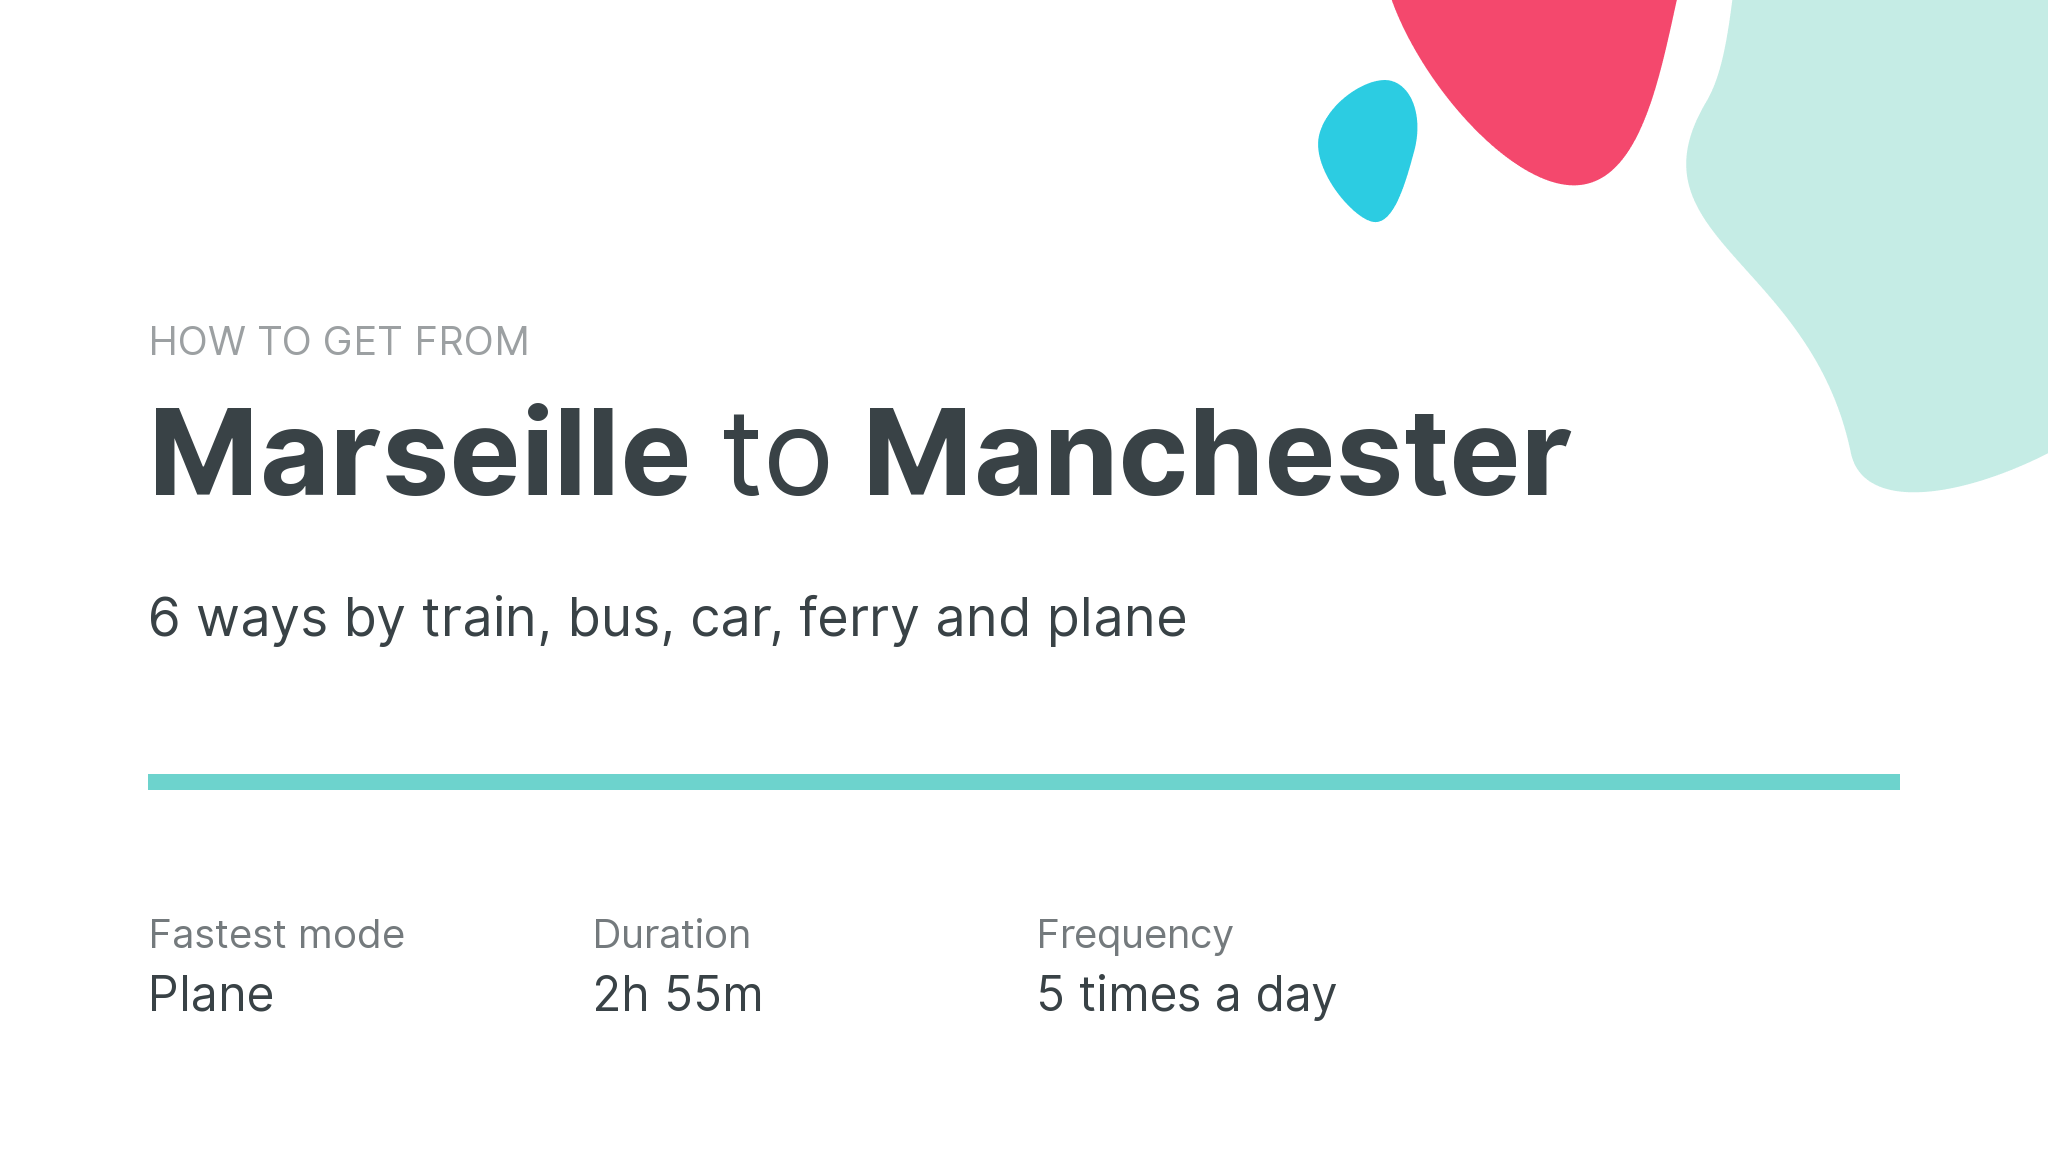 How do I get from Marseille to Manchester